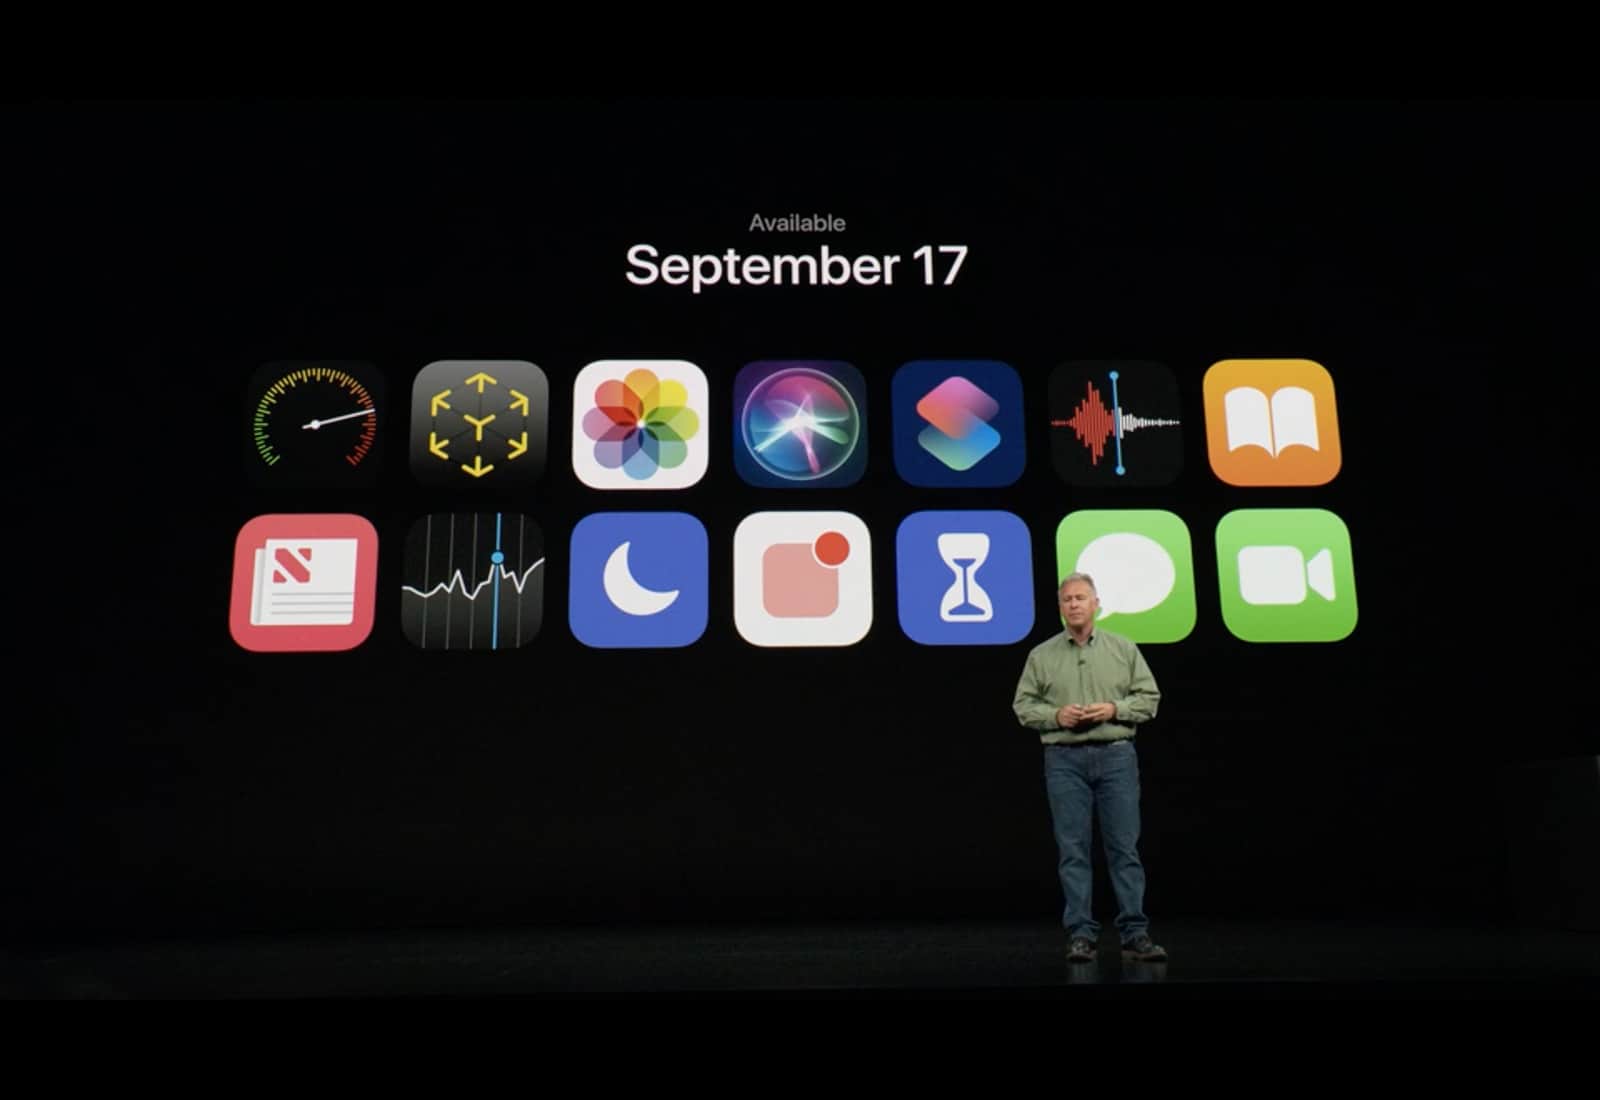 iOS 12 launched on September 17